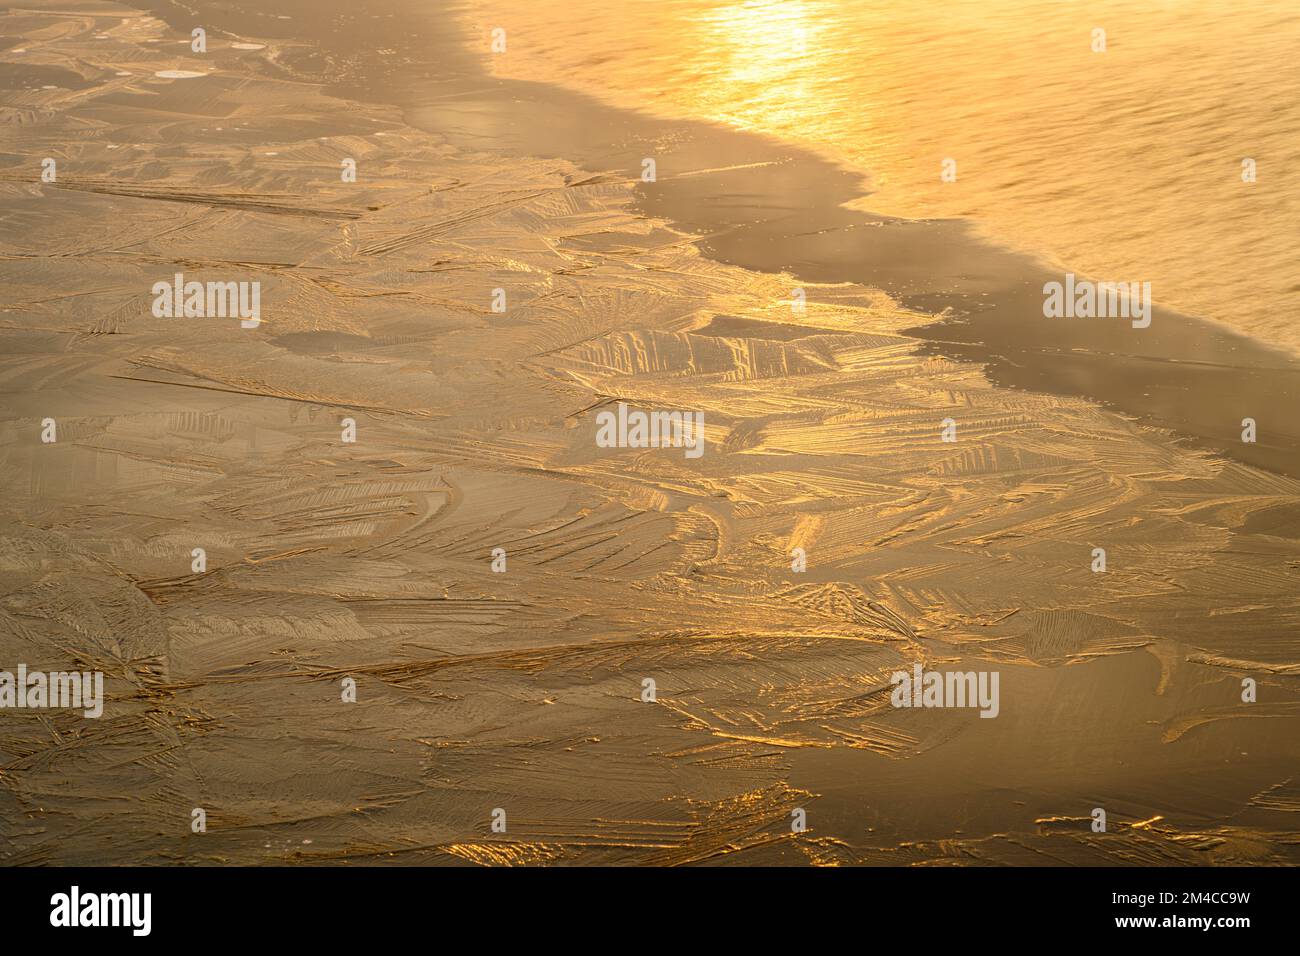 Sunrise reflections in ice, open water of a beaver pond in early spring, Greater Sudbury, Ontario, Canada Stock Photo